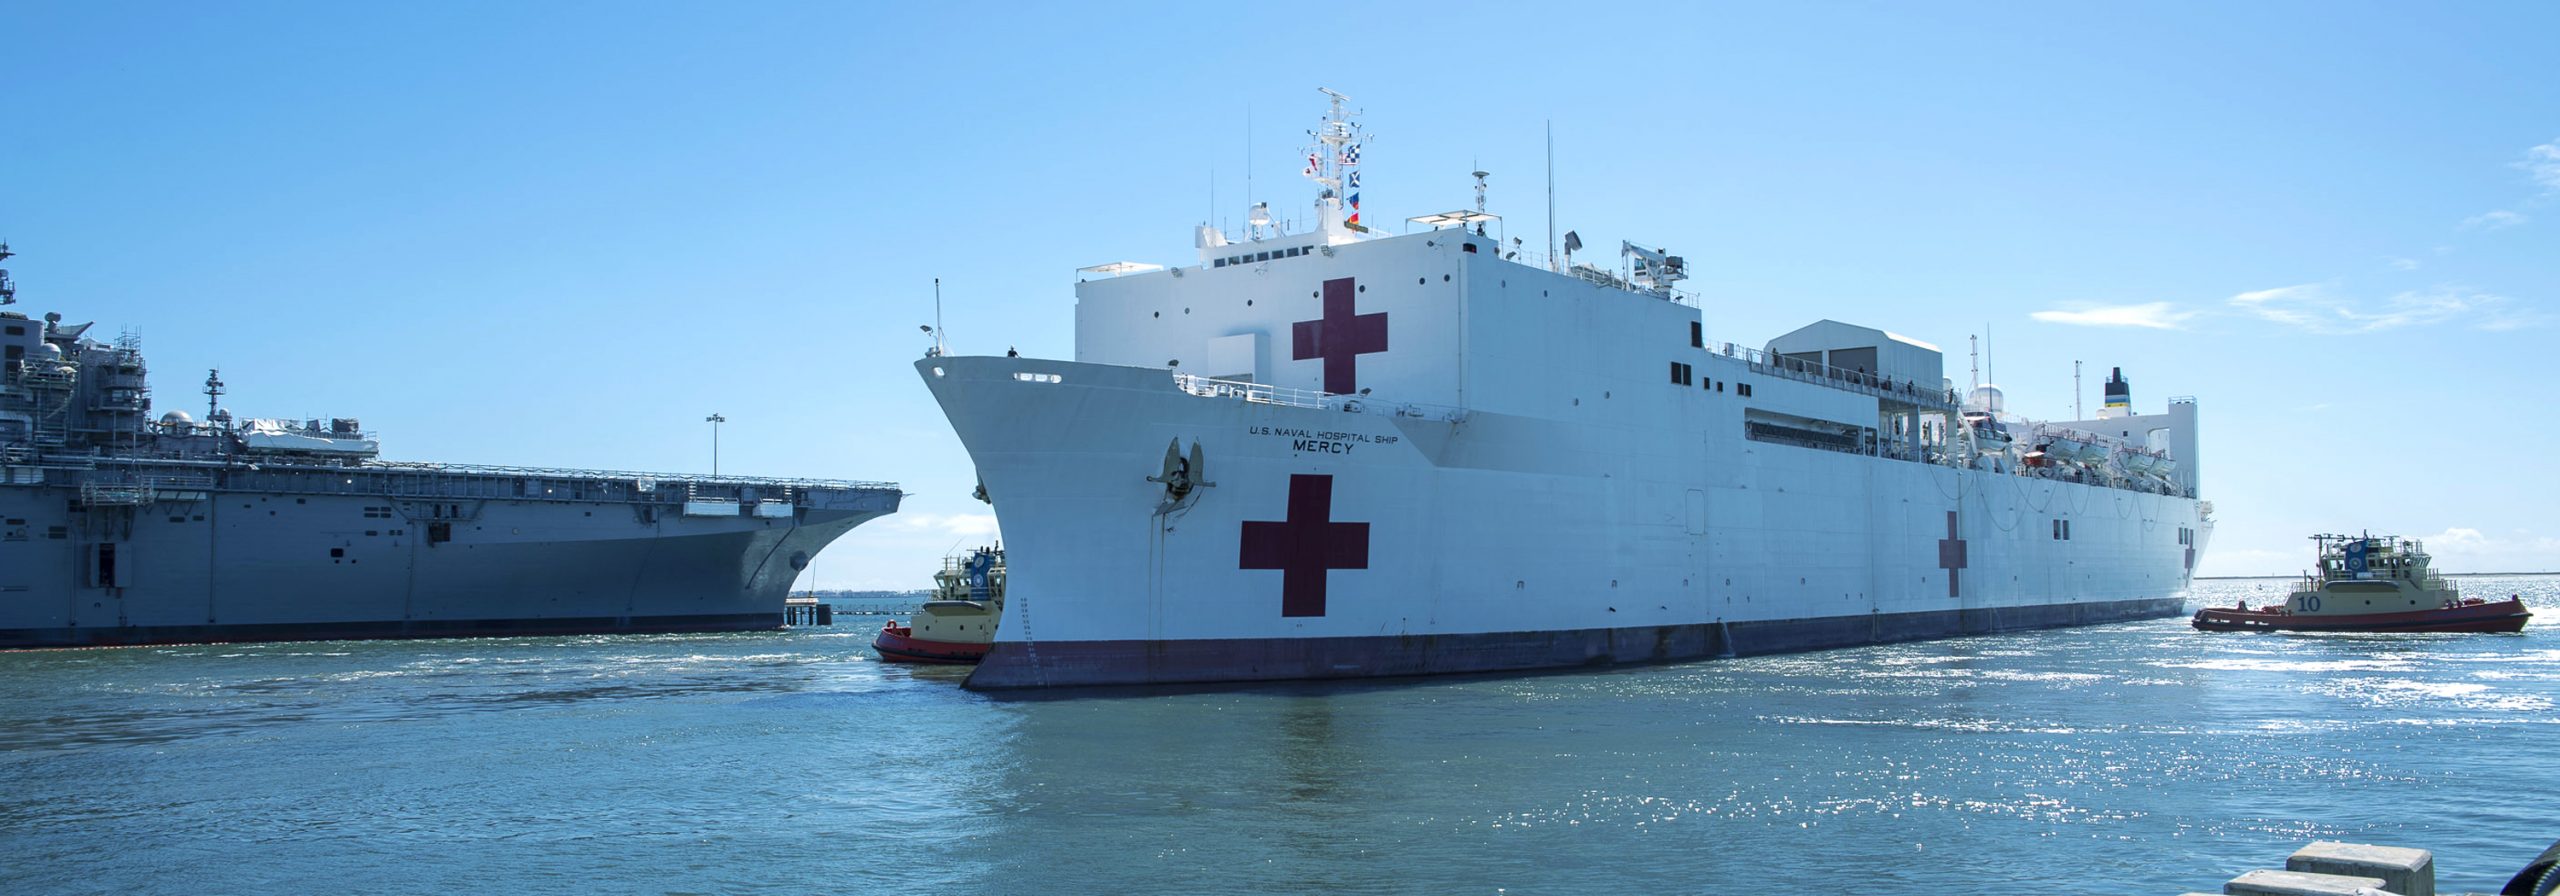 ECS Supporting Coronavirus Relief Aboard the USNS Mercy